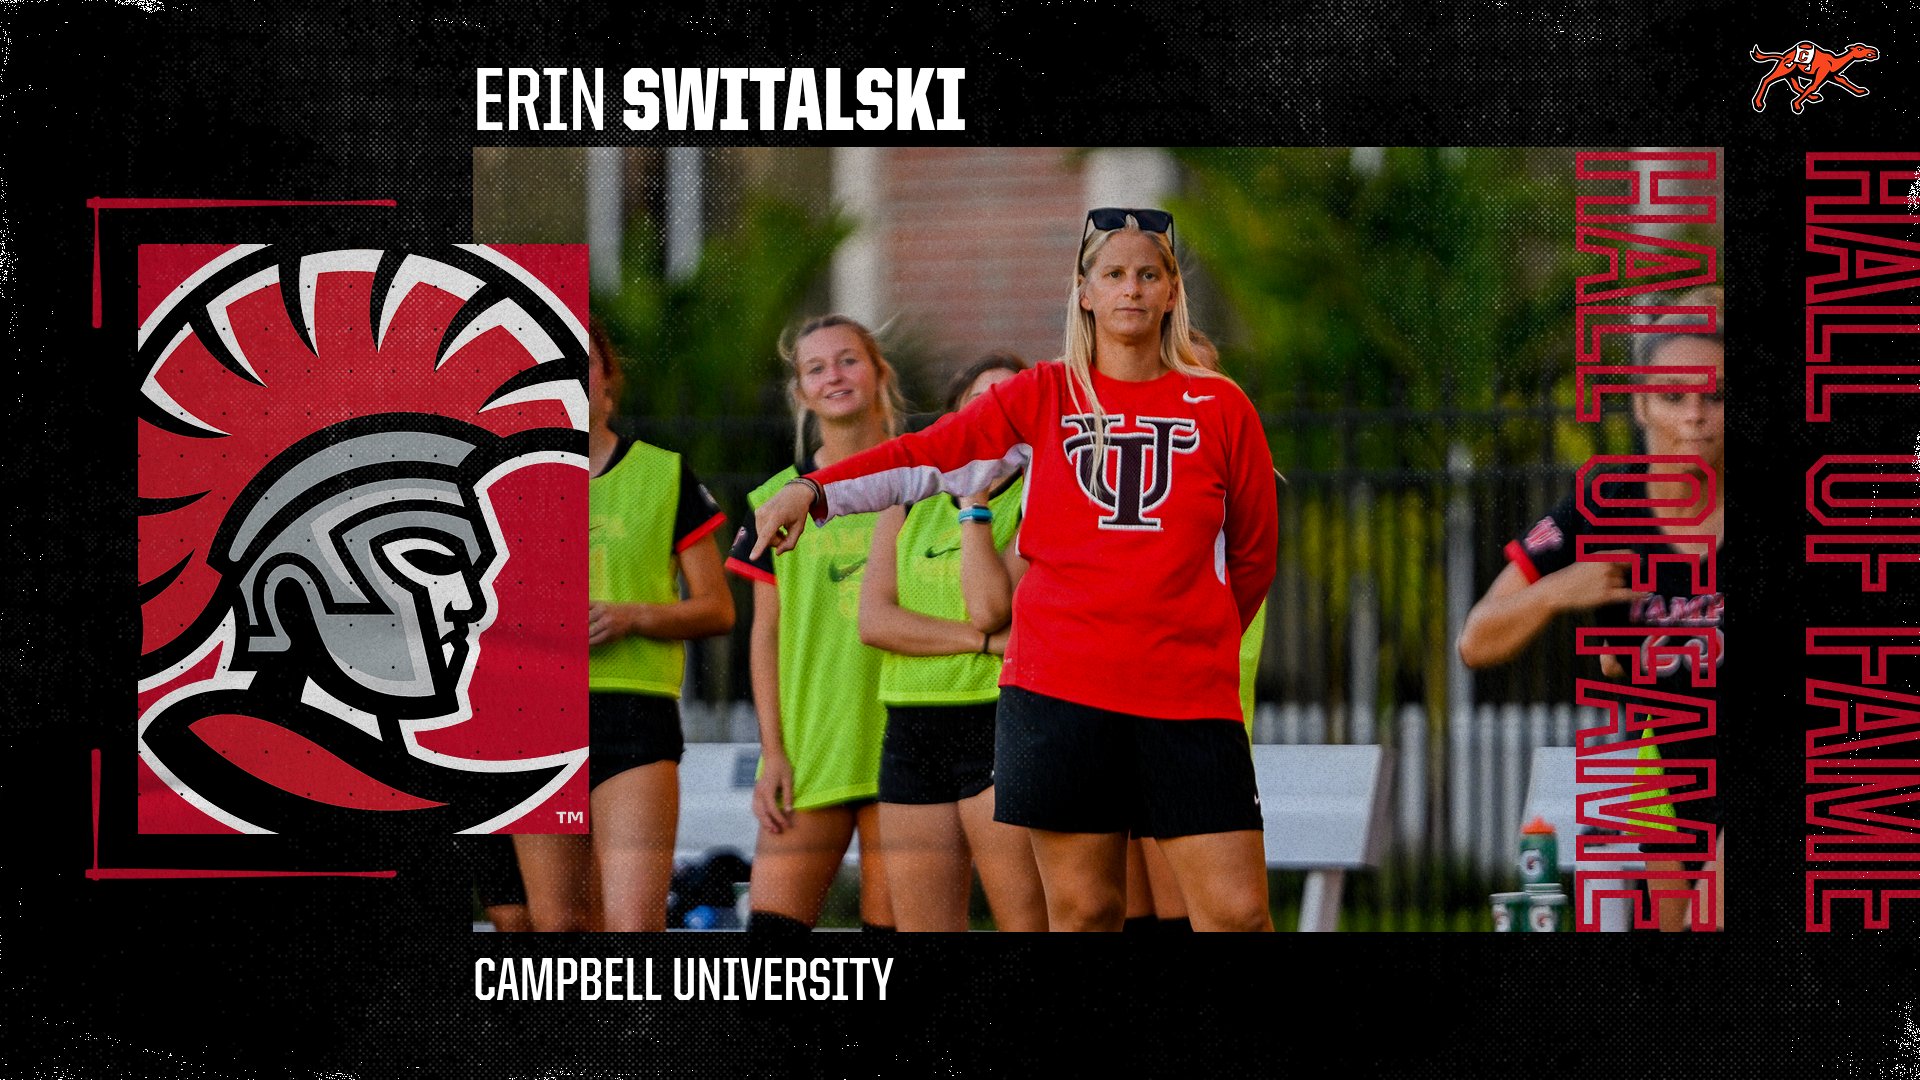 Erin Switalski Set to be Inducted to Campbell University Hall of Fame